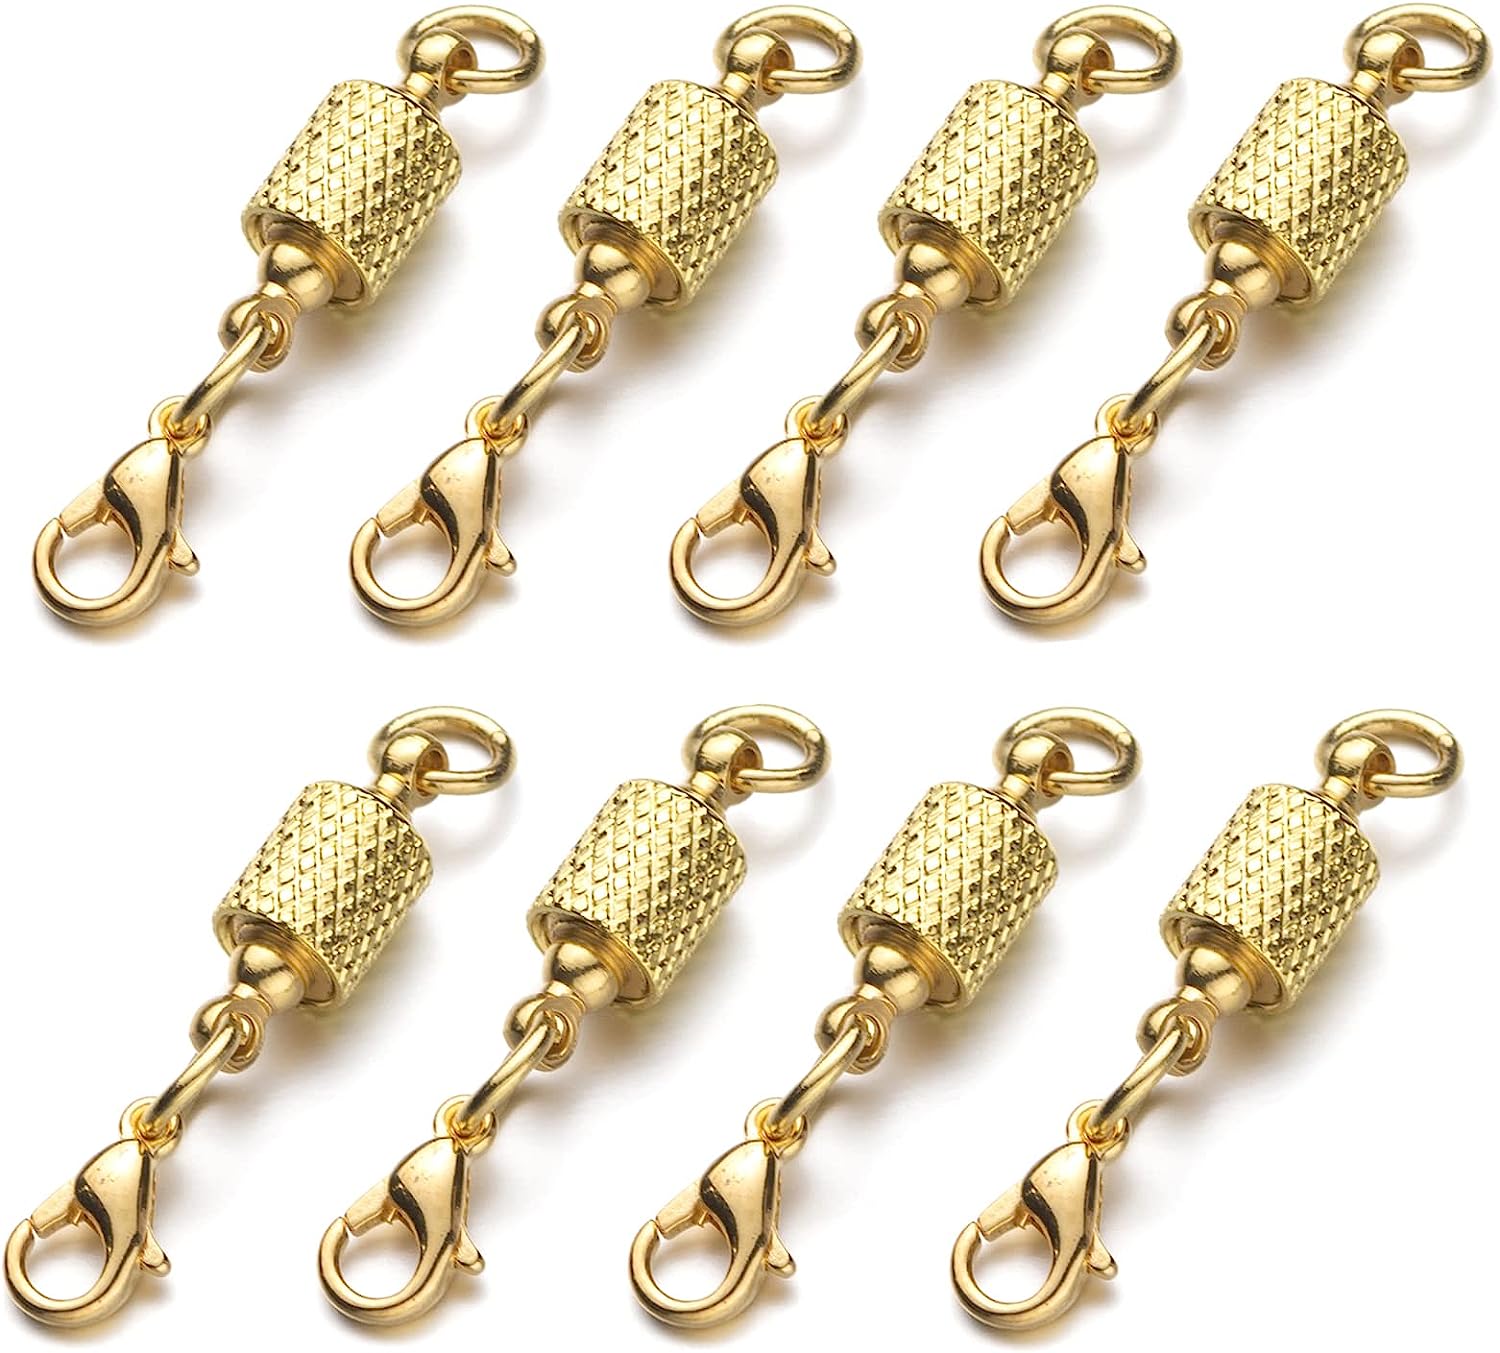 4 Sizes Slide Clasp Lock Necklace Connectors Multi Strands Slide Tube  Spacer Clasps Necklace Bracelet Chain Extenders for DIY Layered Anklets Necklace  Jewelry Making Crafts 14 Pcs Golden Silver Tone : Amazon.in: